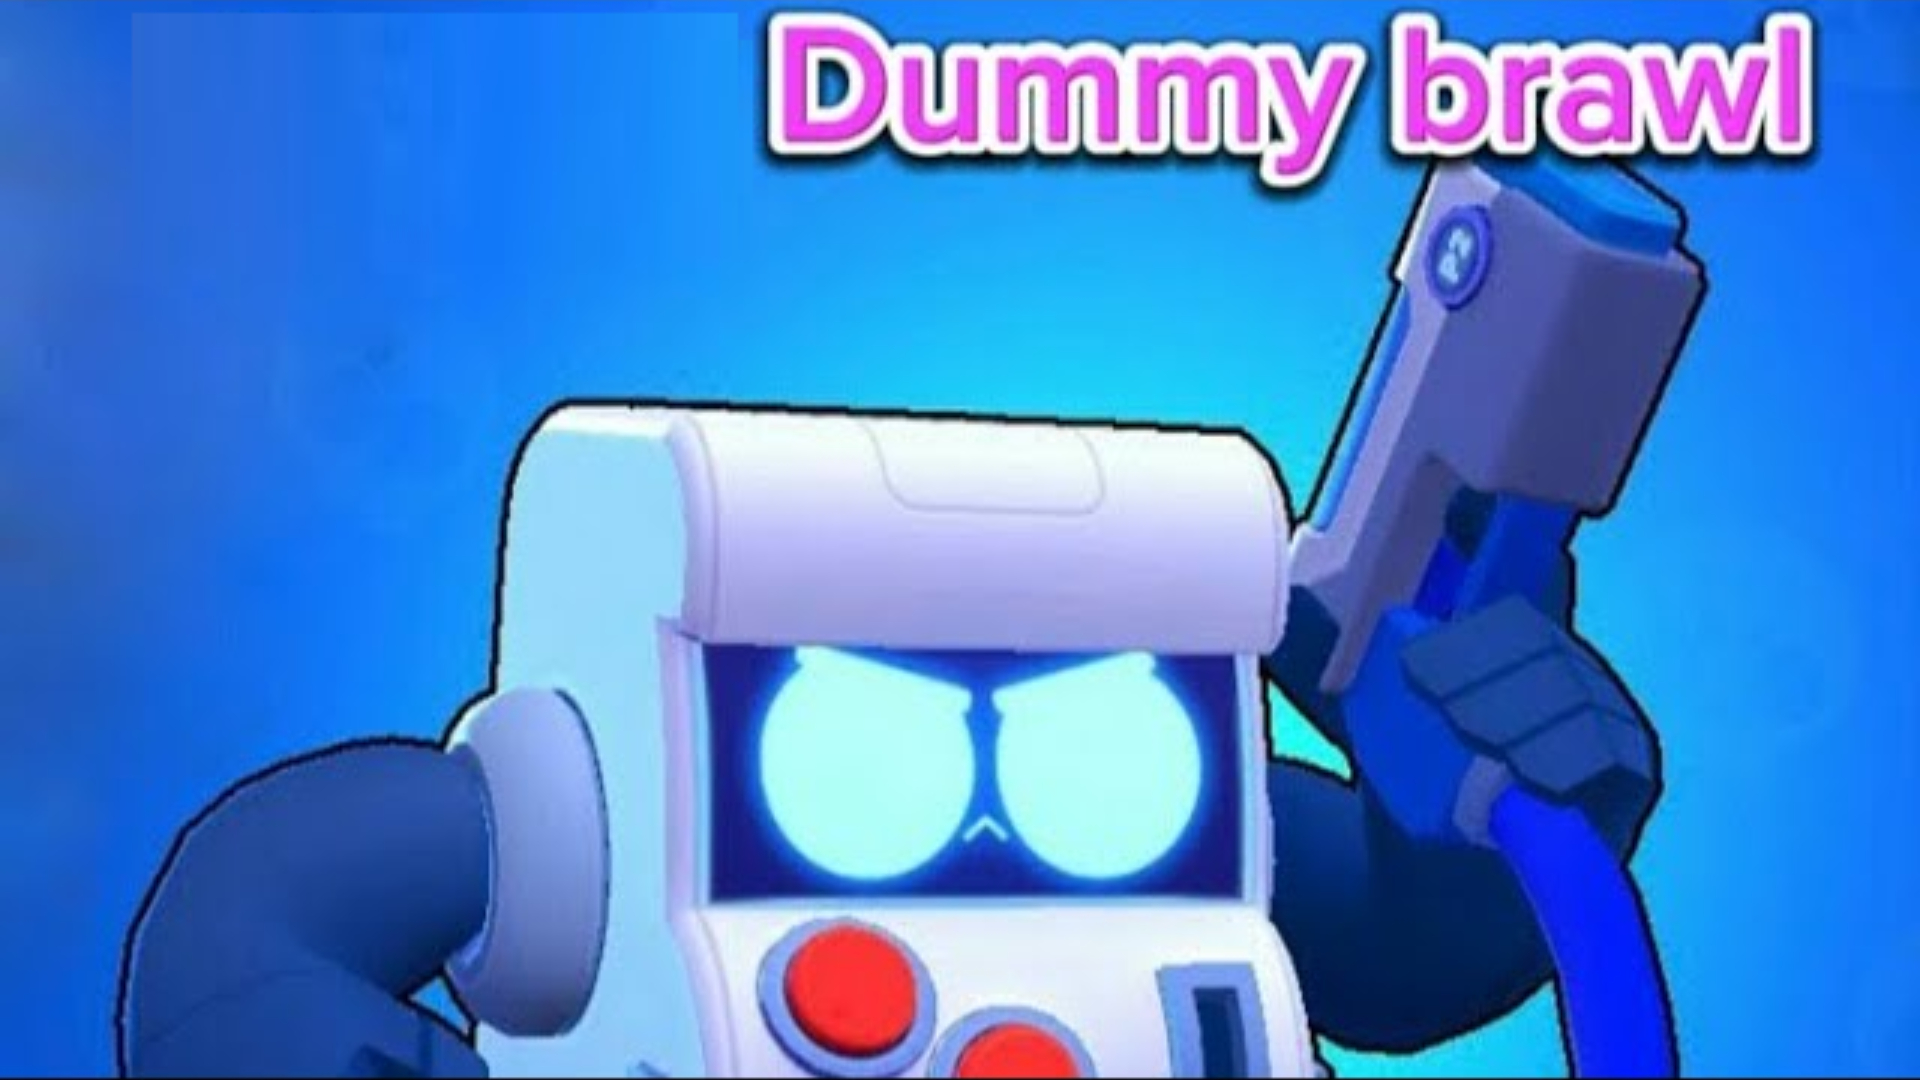 How to Download Dummy Brawl Latest Version on Android